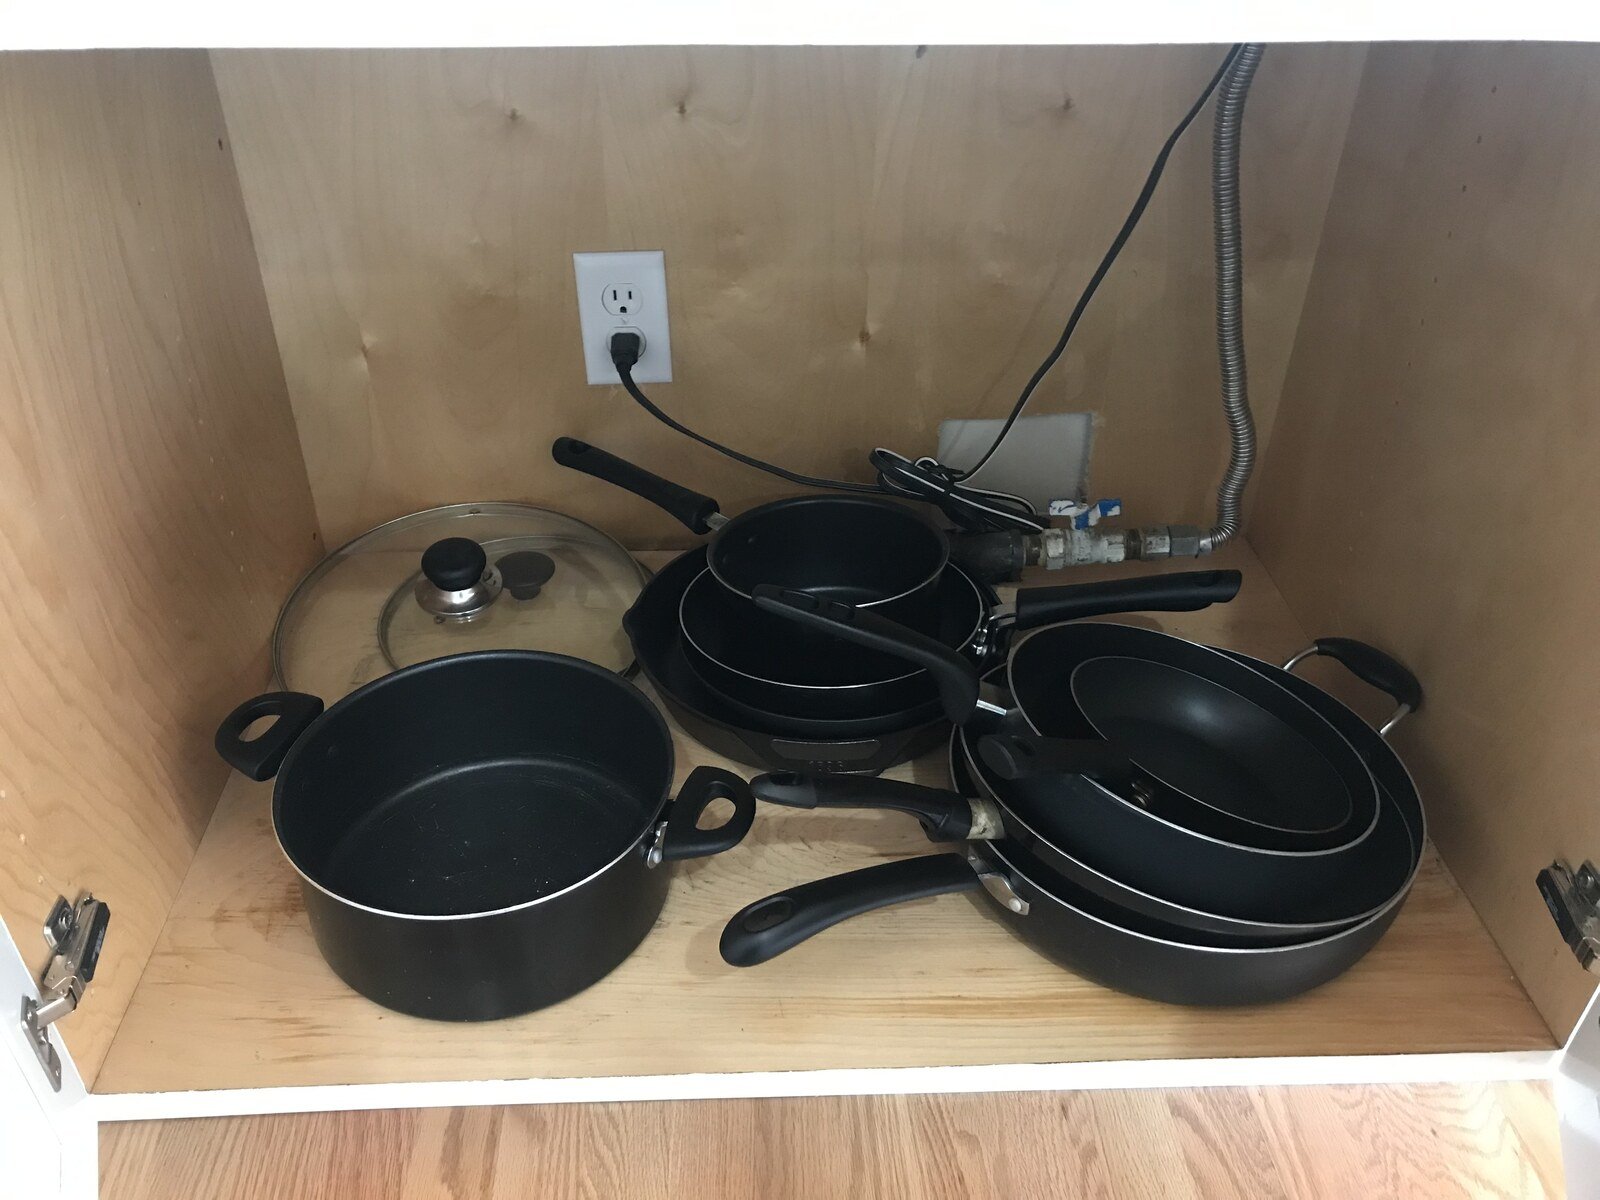 Pots and Pans Before